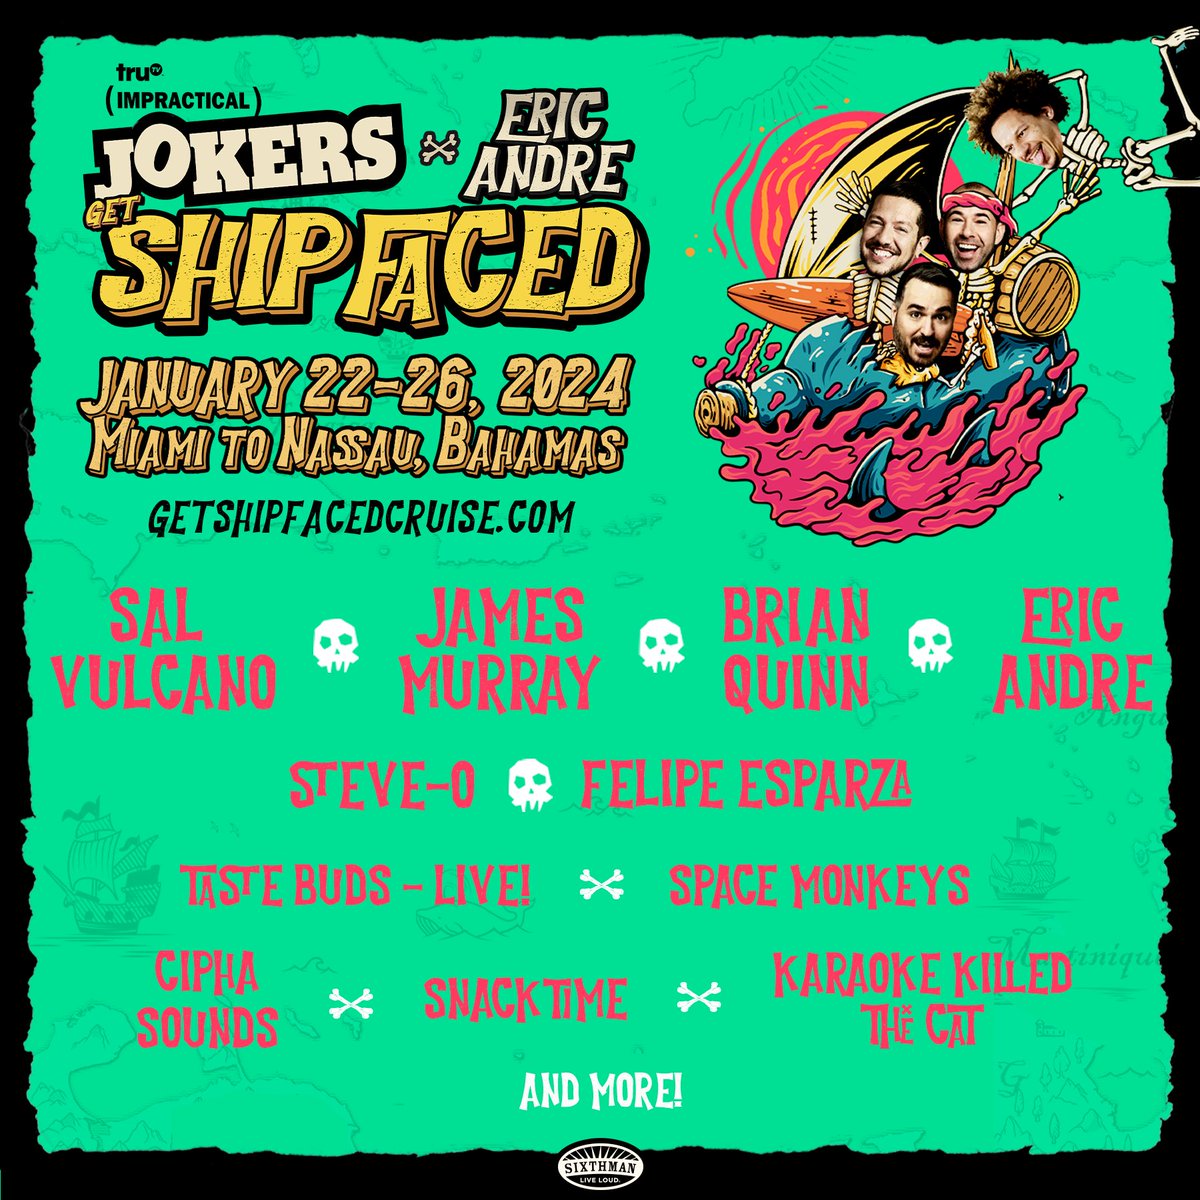 💥 Join us in welcoming our first wave lineup! Steve-O, Felipe Esparza, Taste Buds - Live, Space Monkeys, Cipha Sounds, SNACKTIME, and Karaoke Killed The Cat! Are you ready to Get Ship Faced? Book now while cabins are still available! bit.ly/3Z7nLJE